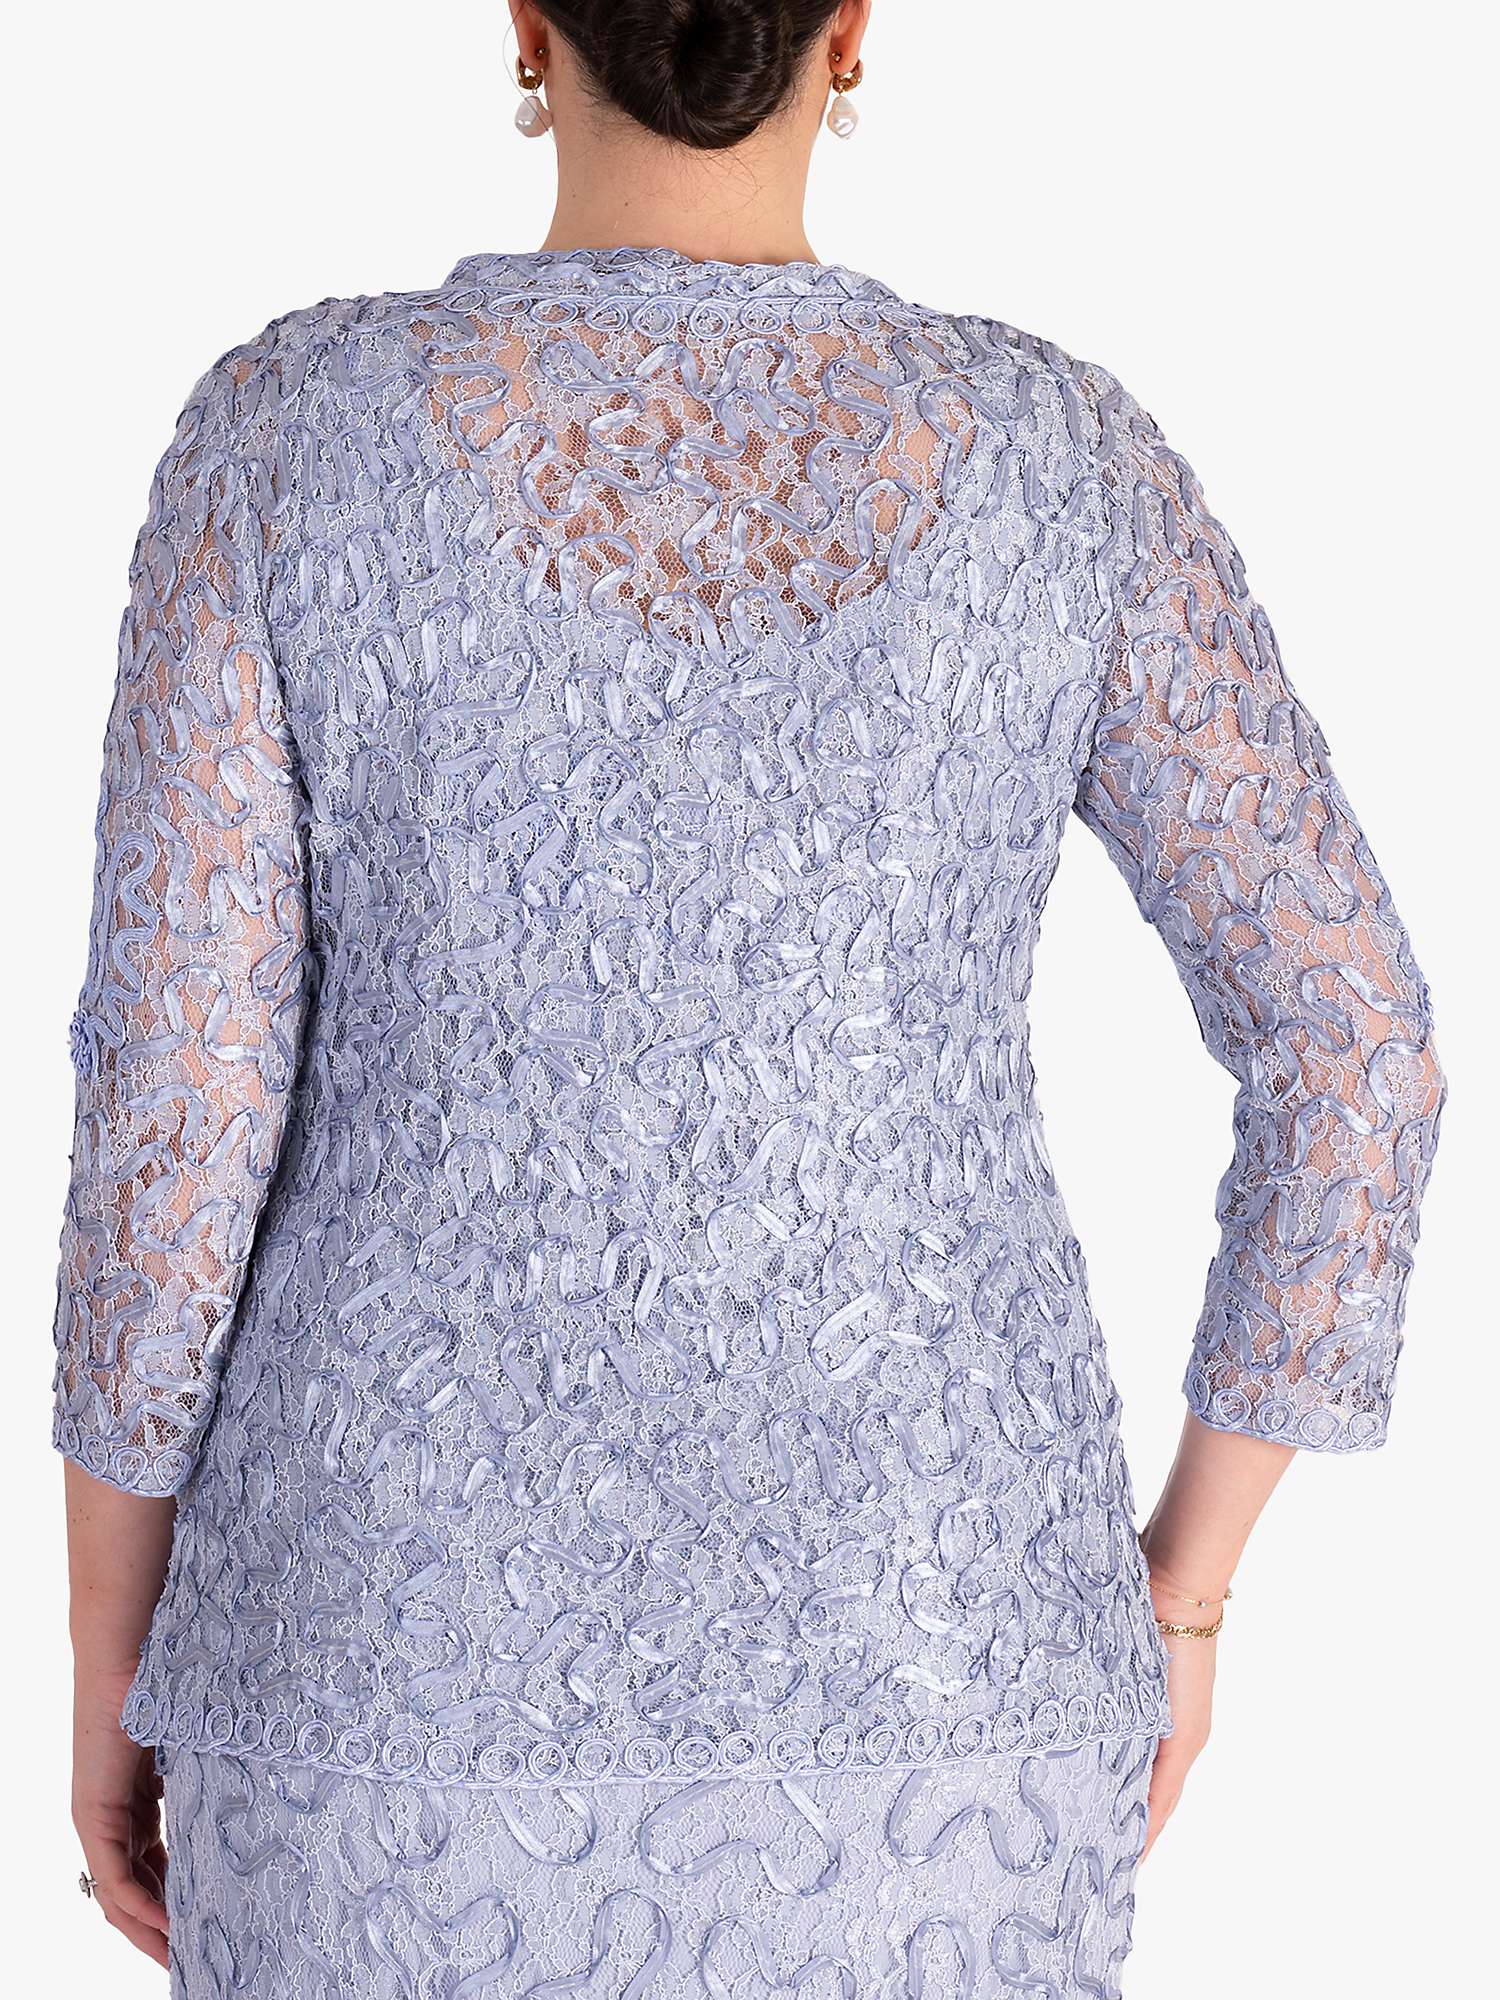 chesca Luxe Lace Jacket, Lilac at John Lewis & Partners